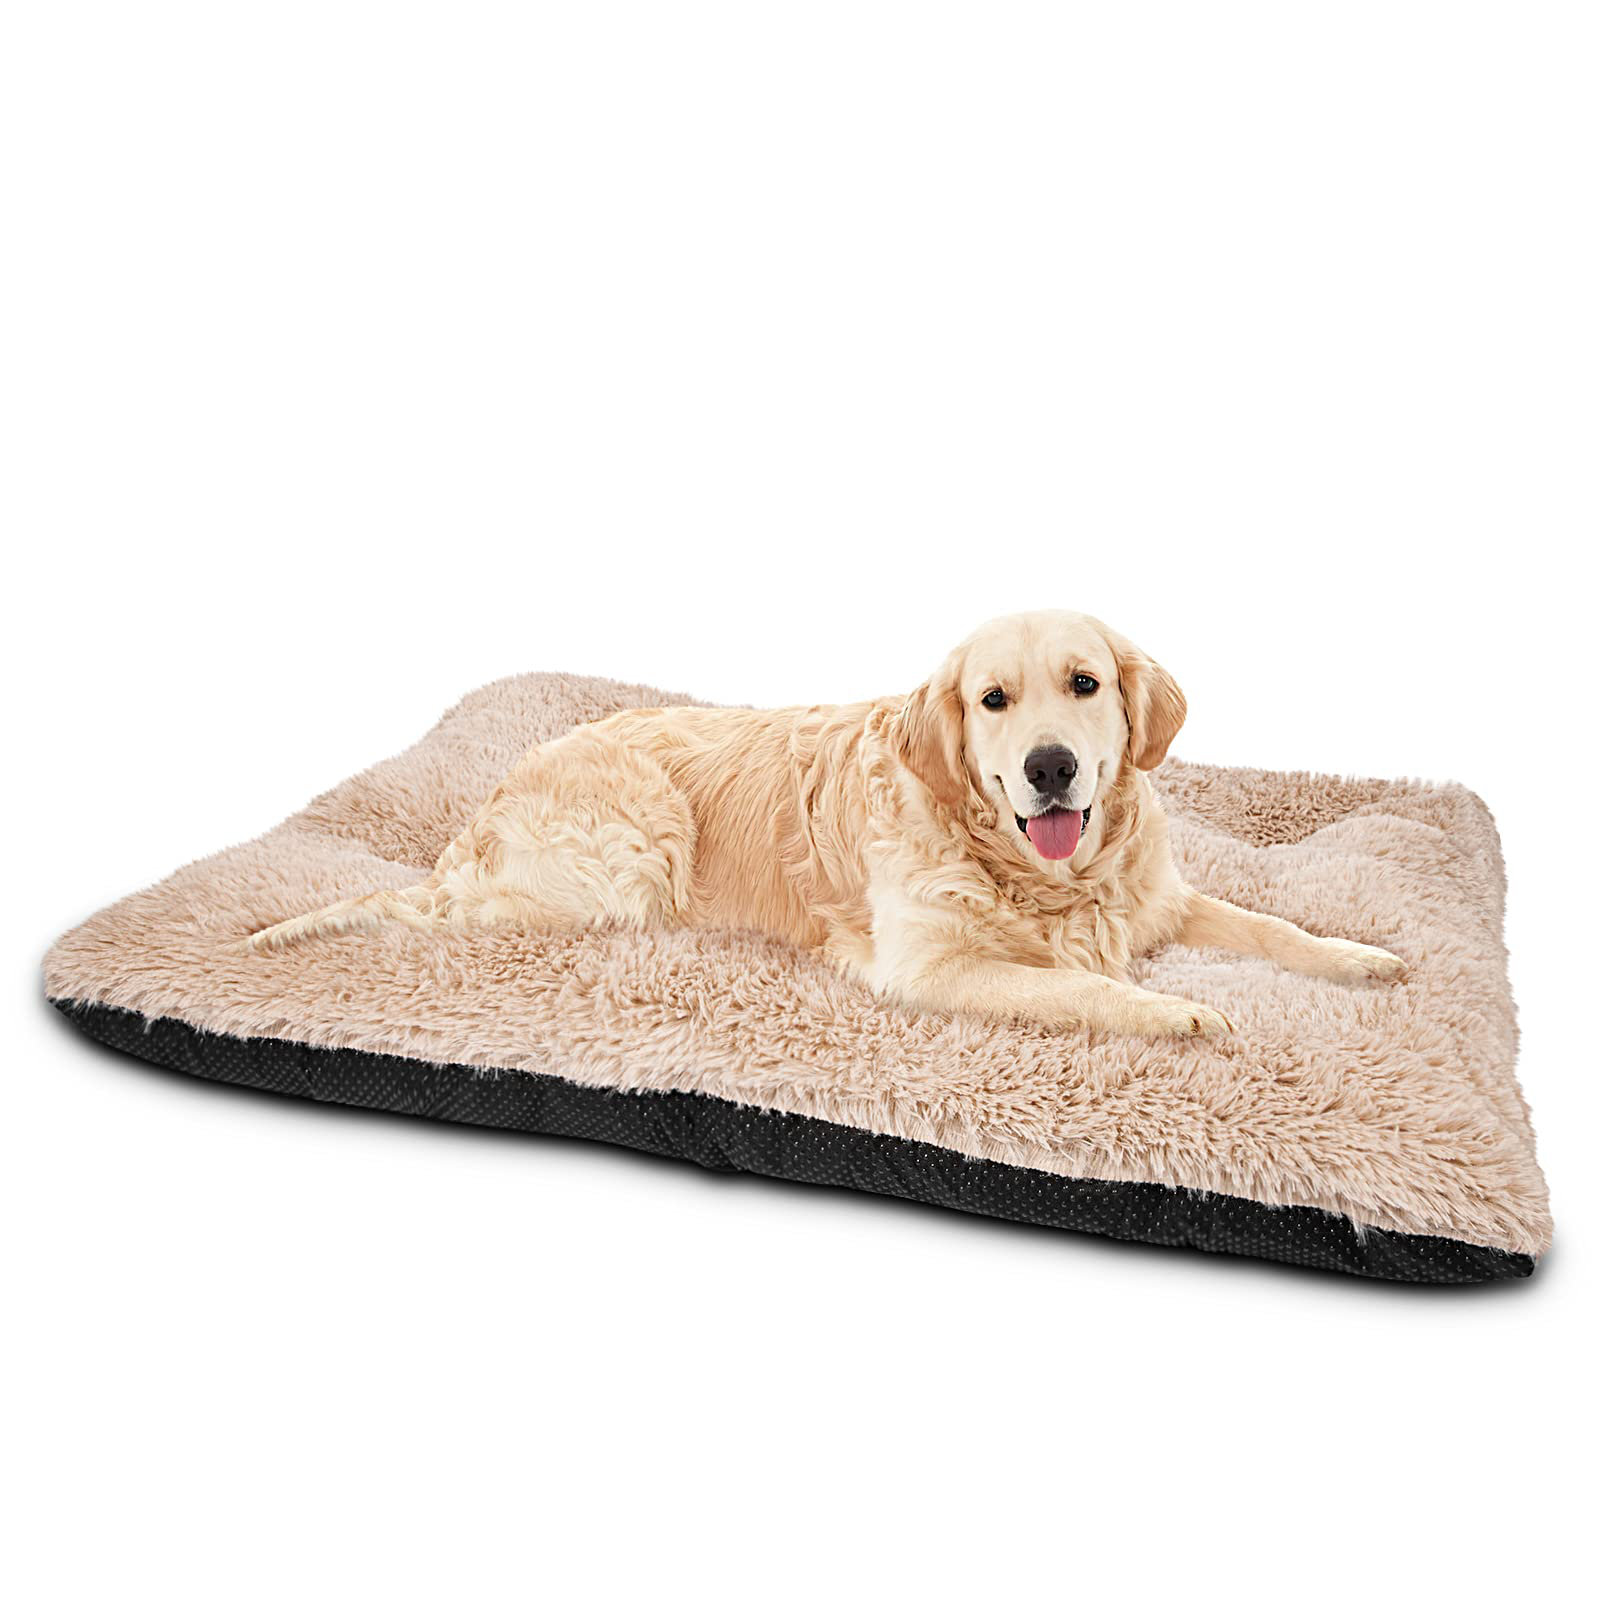  furrybaby Dog Bed Mat Soft Crate Mat with Anti-Slip